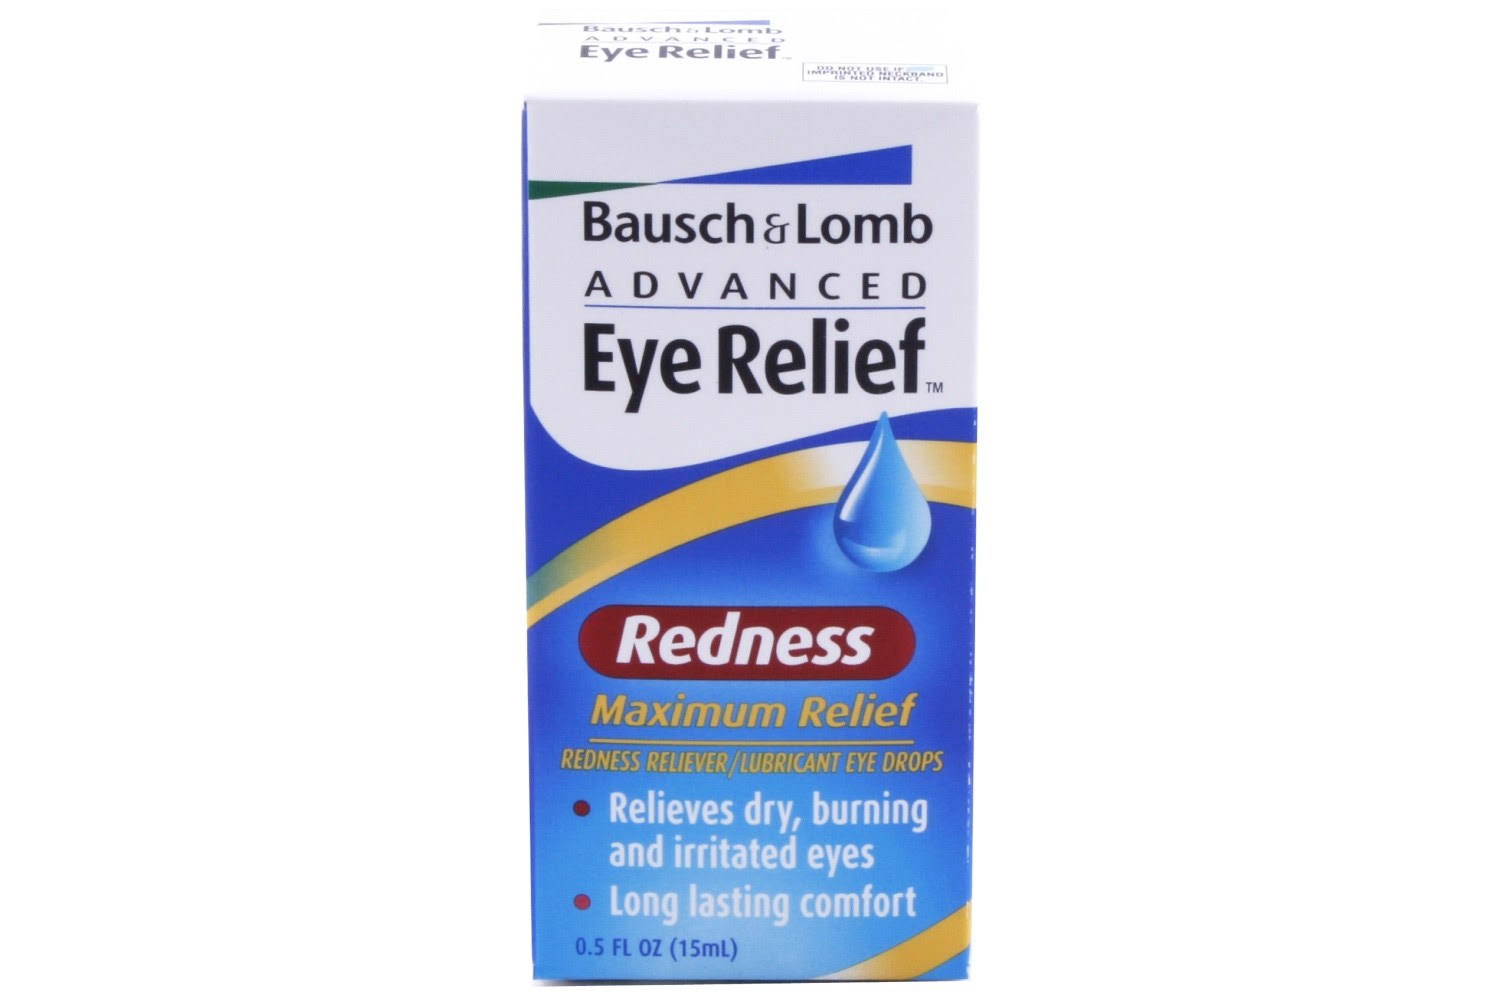 Bausch + Lomb Advanced Eye Relief Maximum Redness Reliever/Lubricant Eye Drops